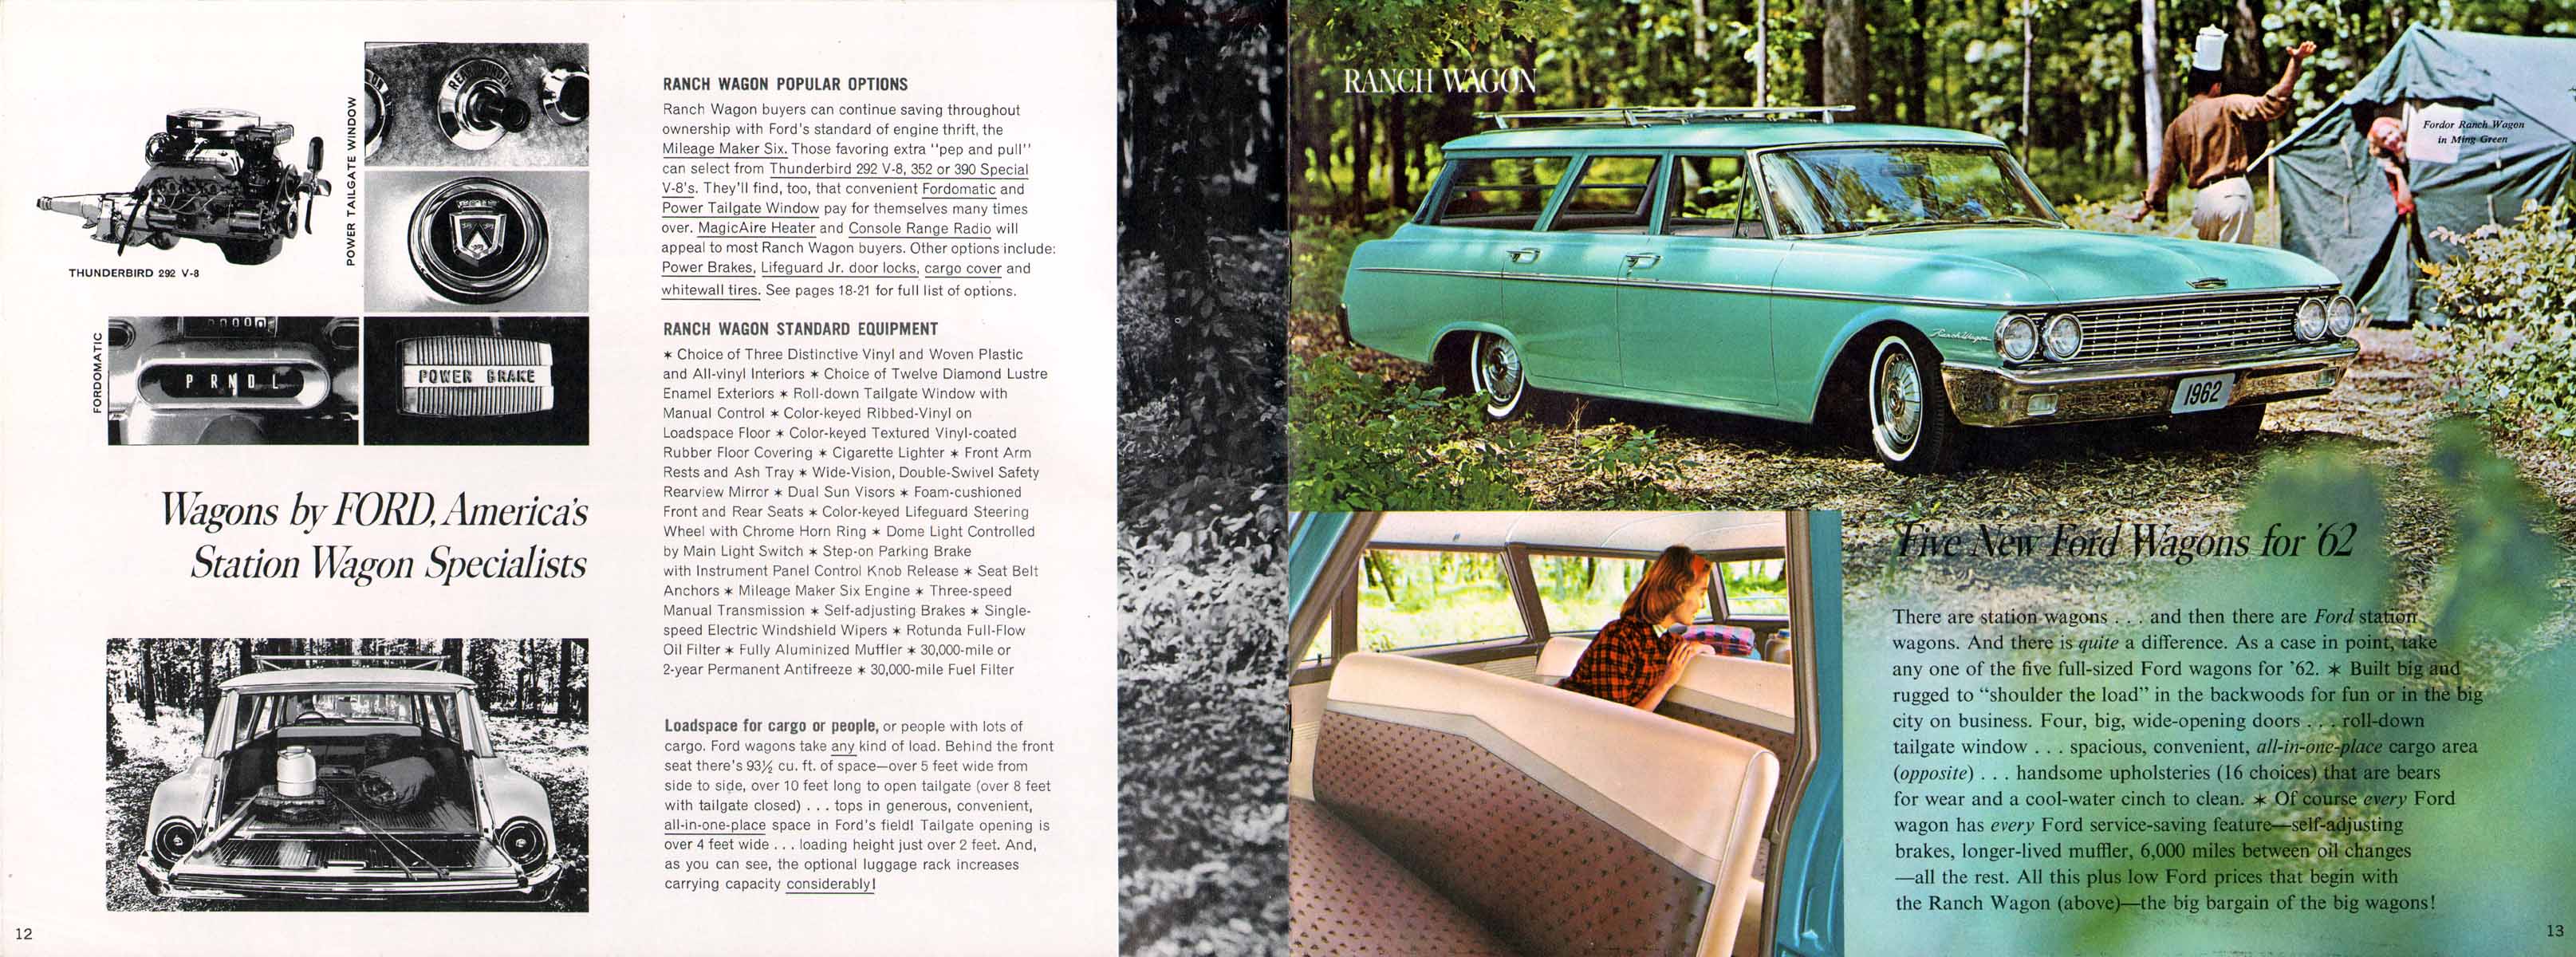 1962 Ford Full-Size Brochure Page 8